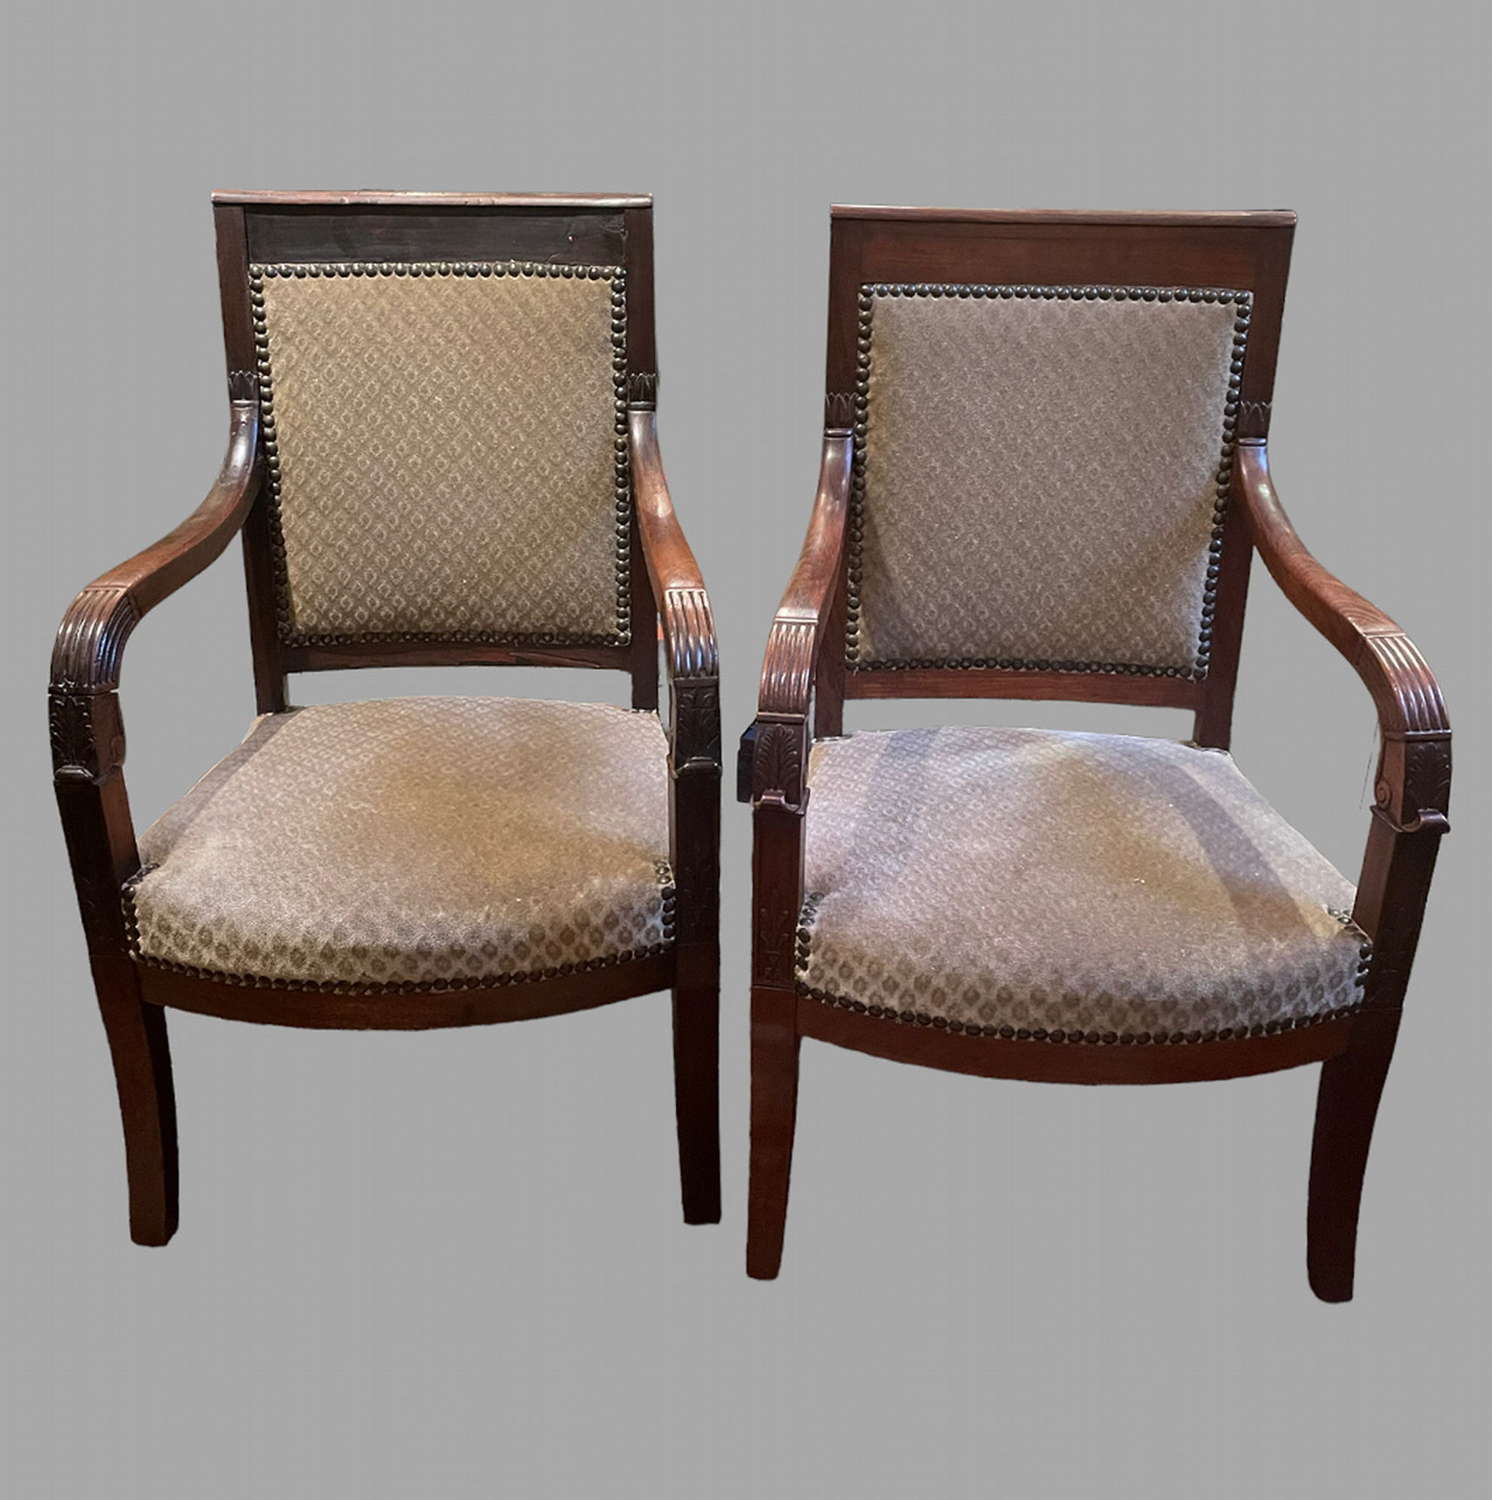 Pair of 19thc Empire Open Armchairs